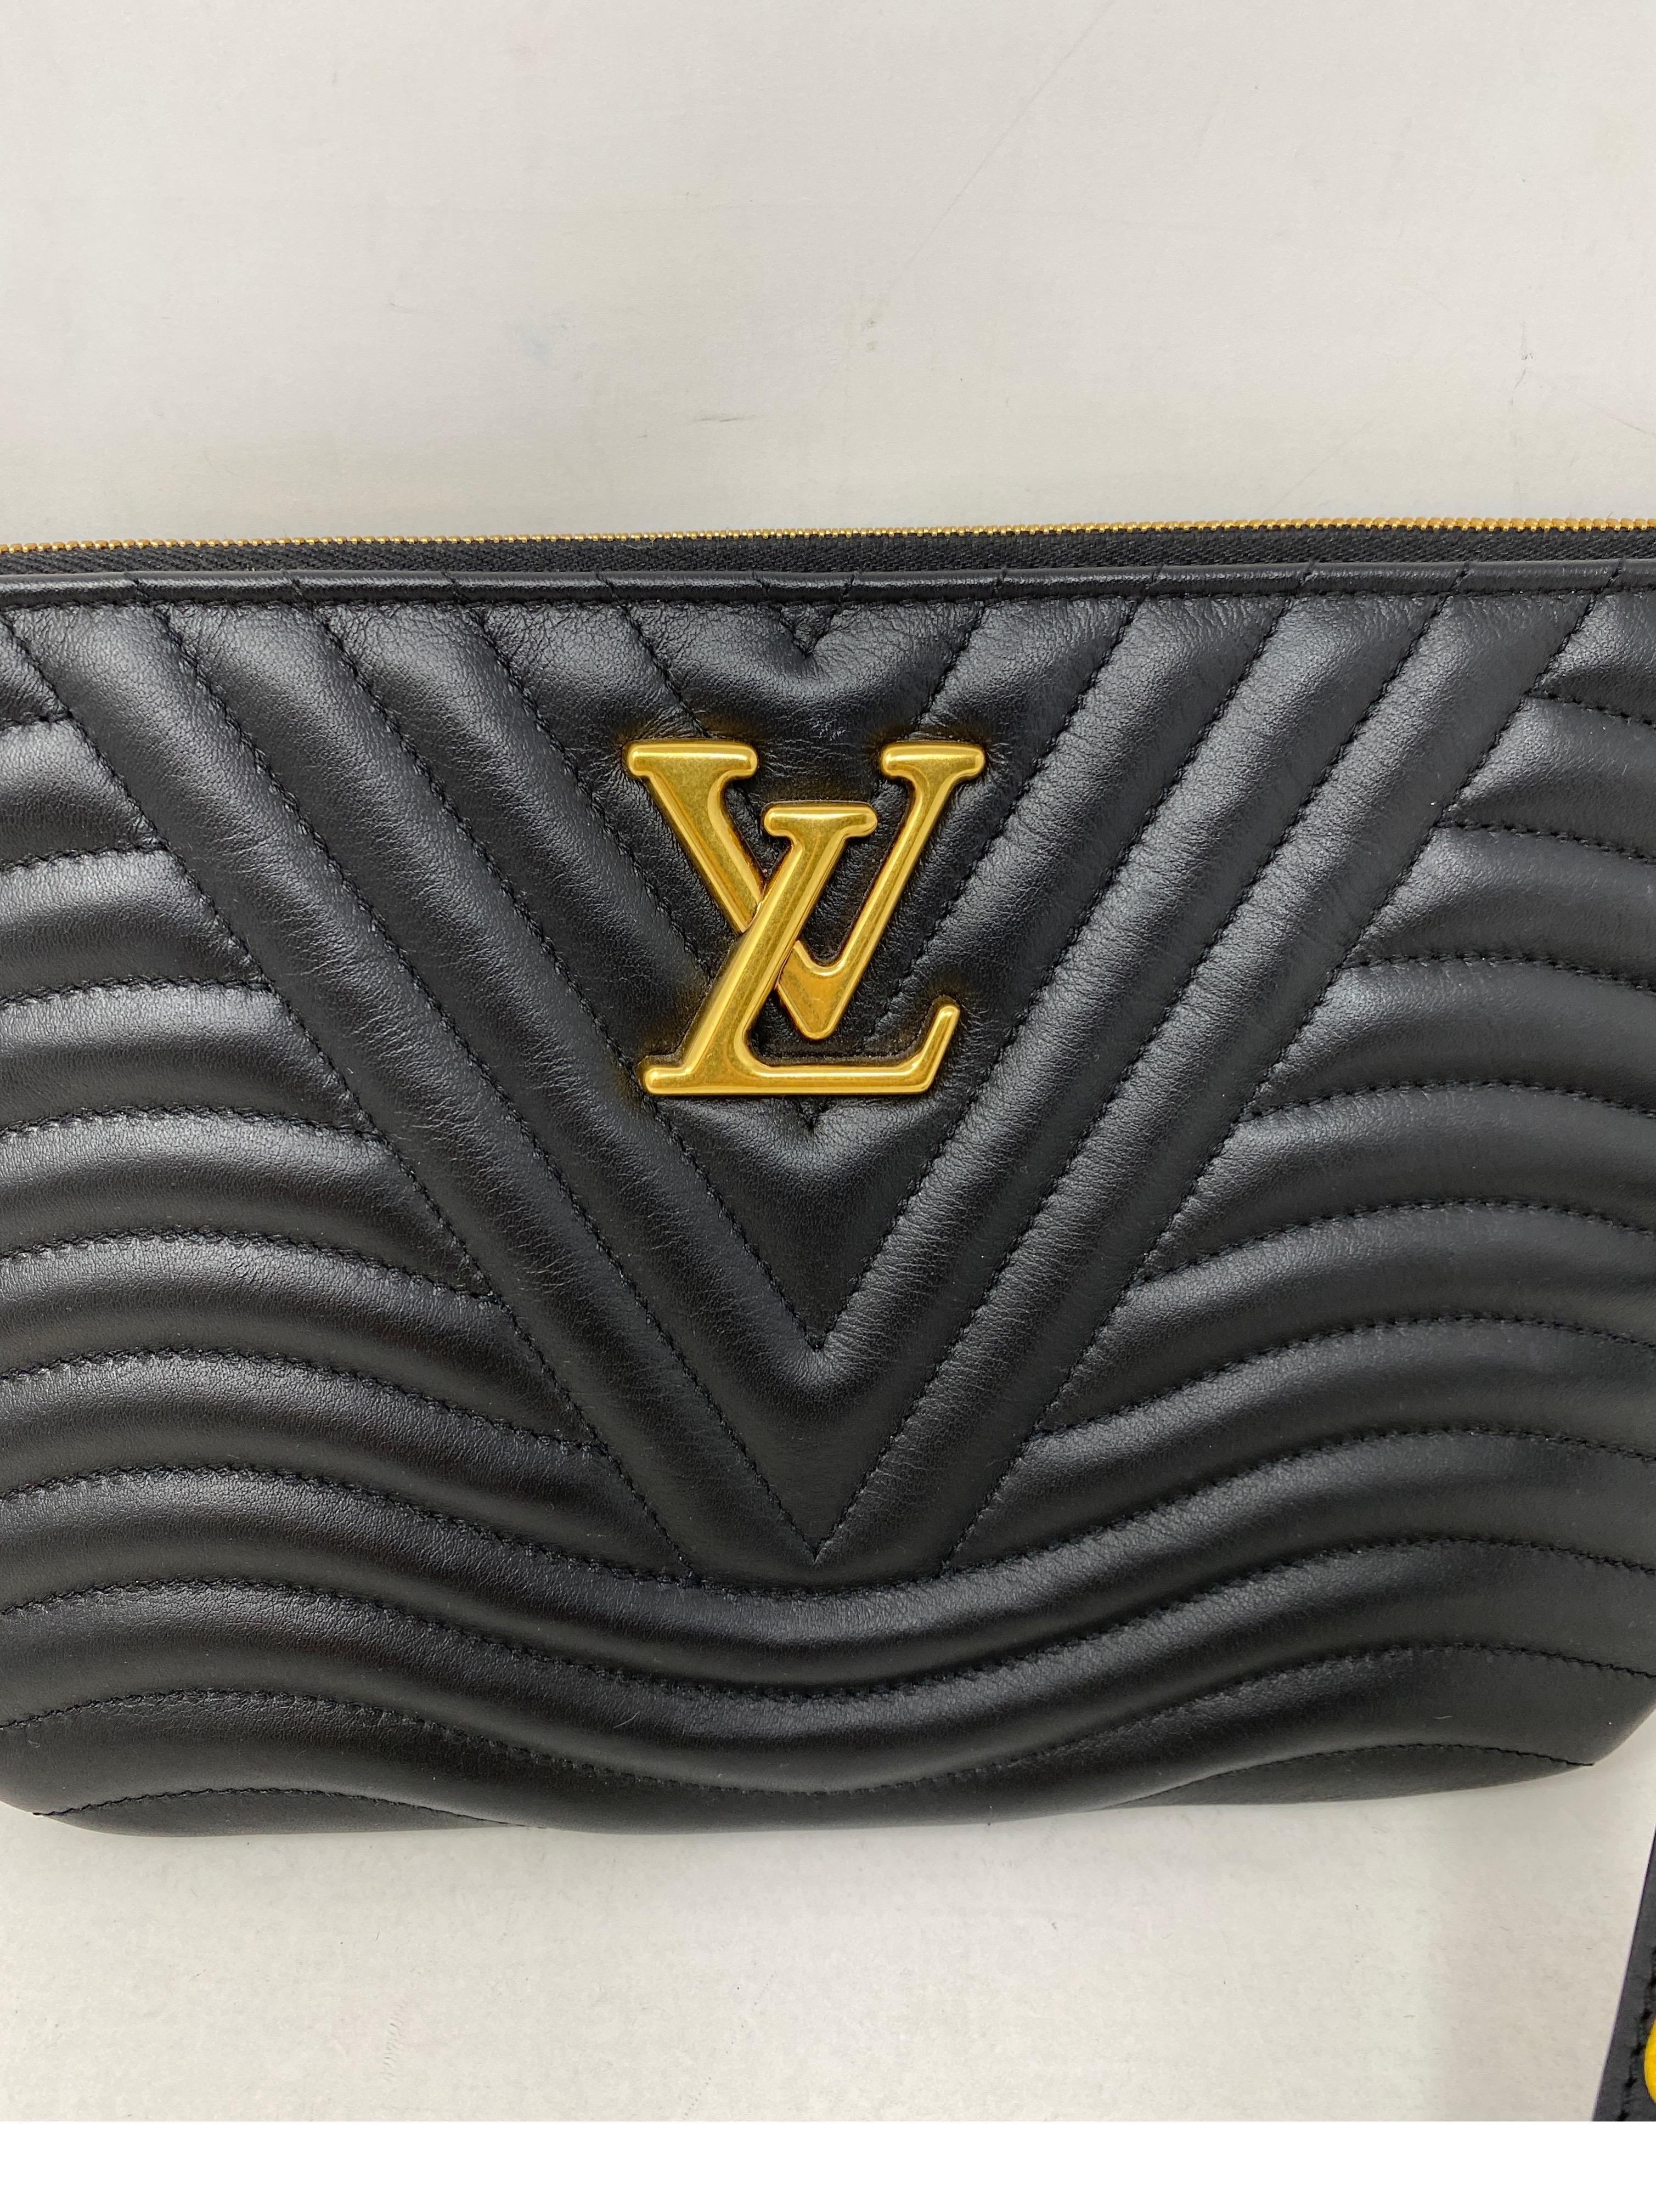 Louis Vuitton Black Leather Wave Pouch. Brand new condition. Never used. Can be worn as a wristlet or a clutch. Guaranteed authentic. 